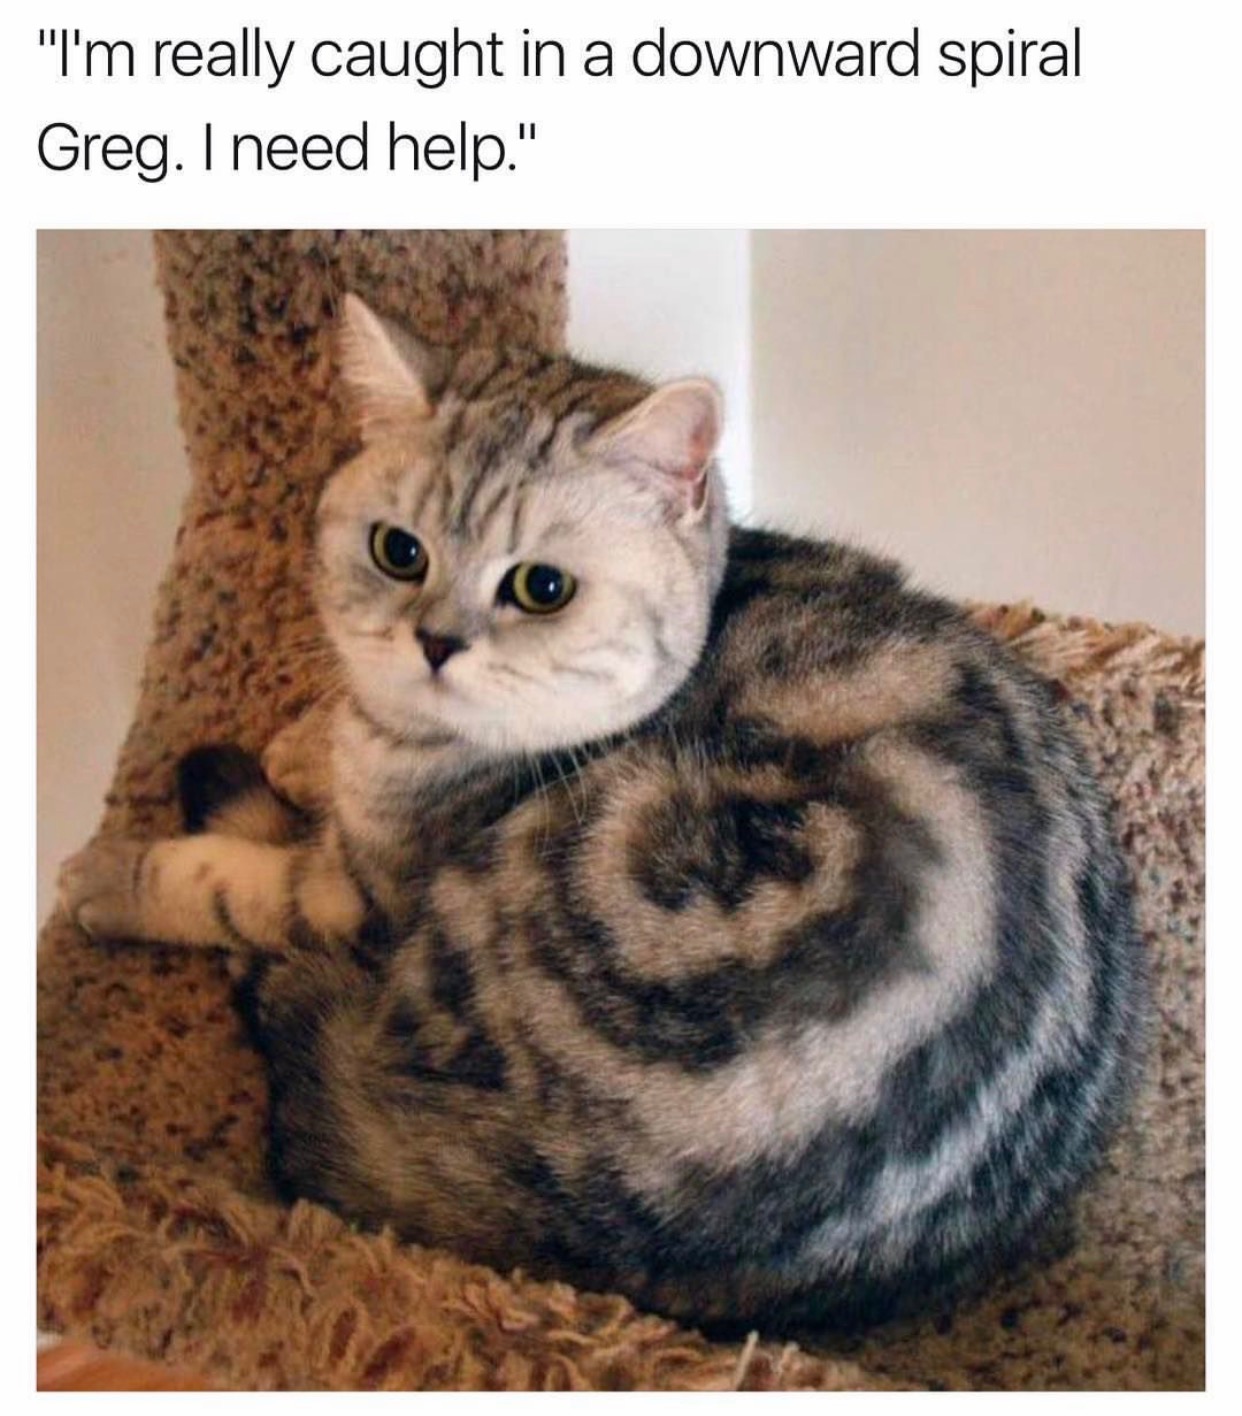 memes - my cat is too cute - "I'm really caught in a downward spiral Greg. I need help."